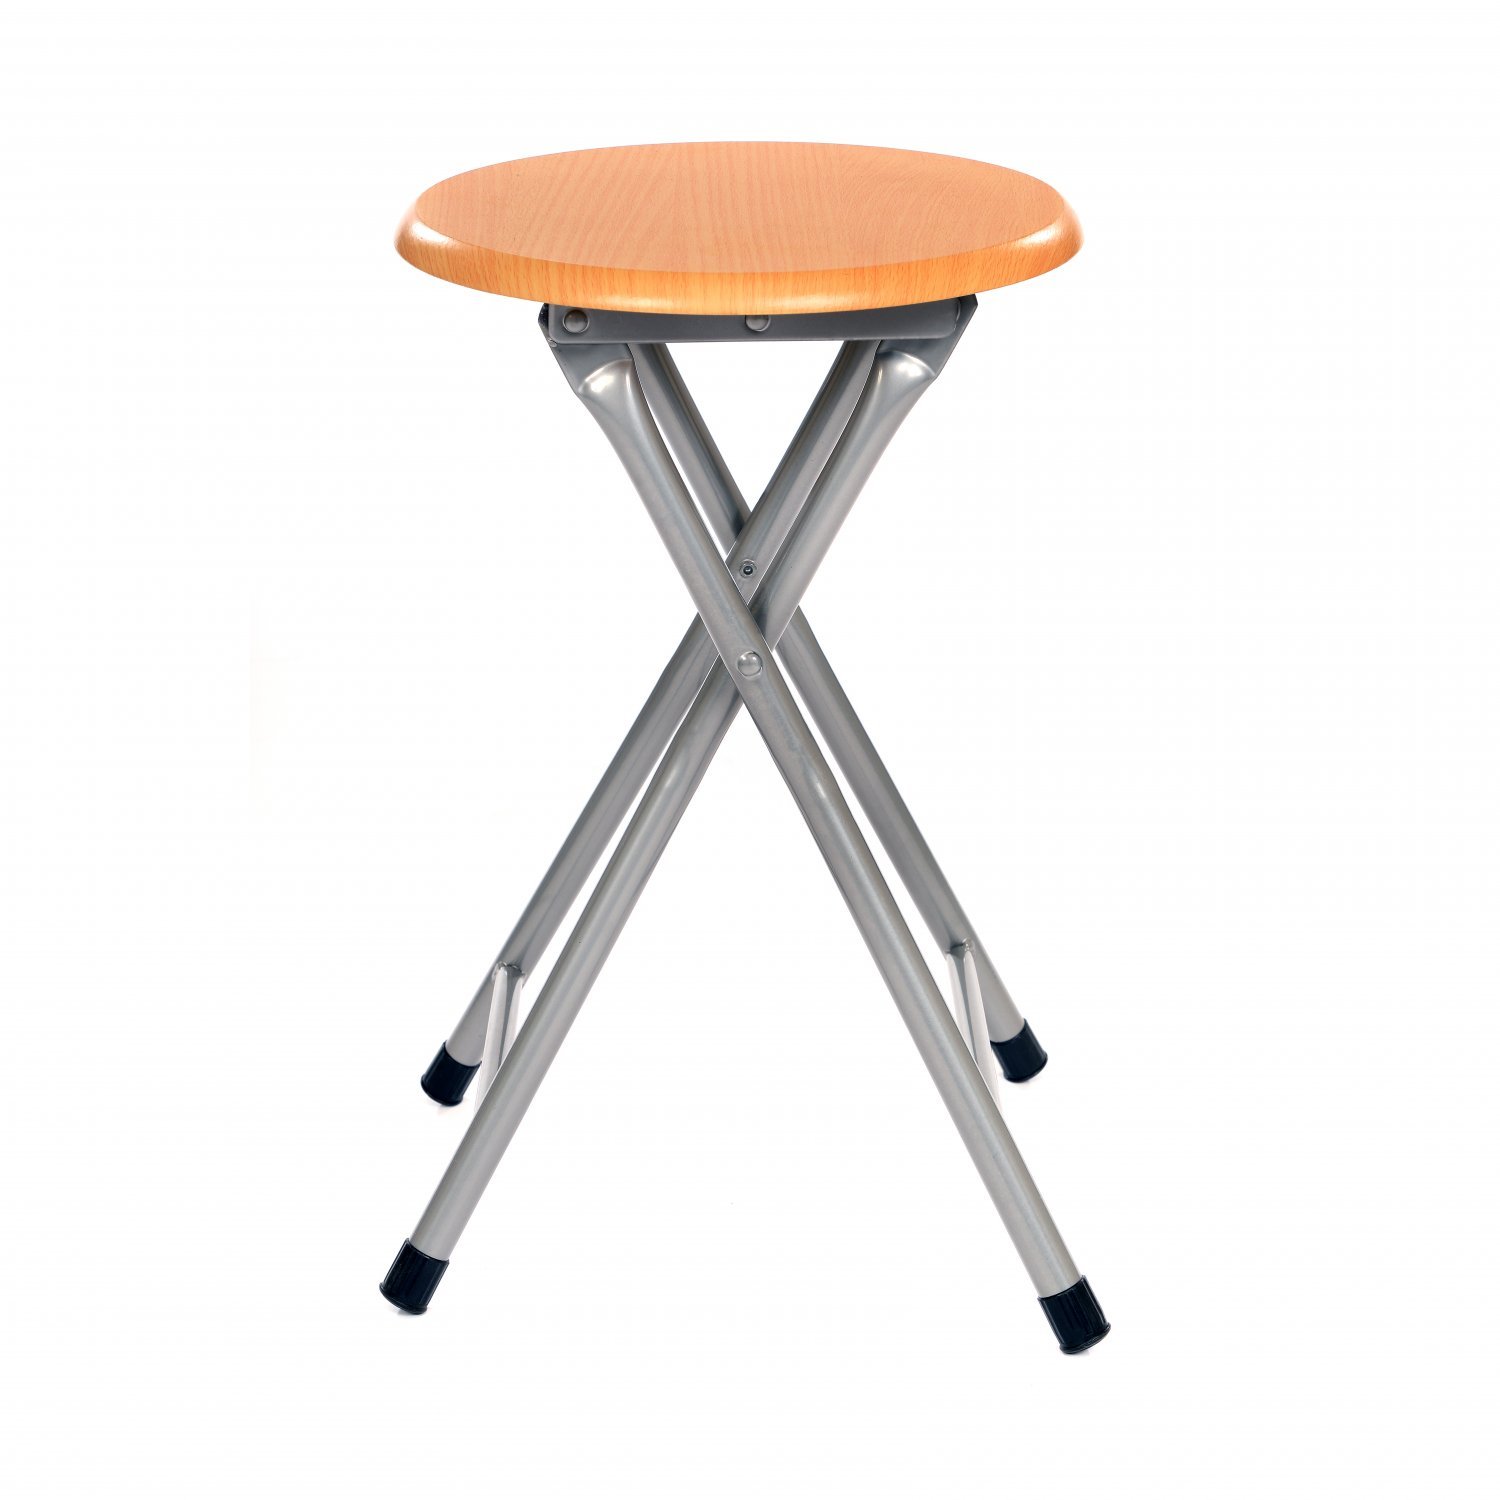 Natural Rubberwood Folding Stool With Silver Legs 45 x 30 x 30cm Legs Seat 